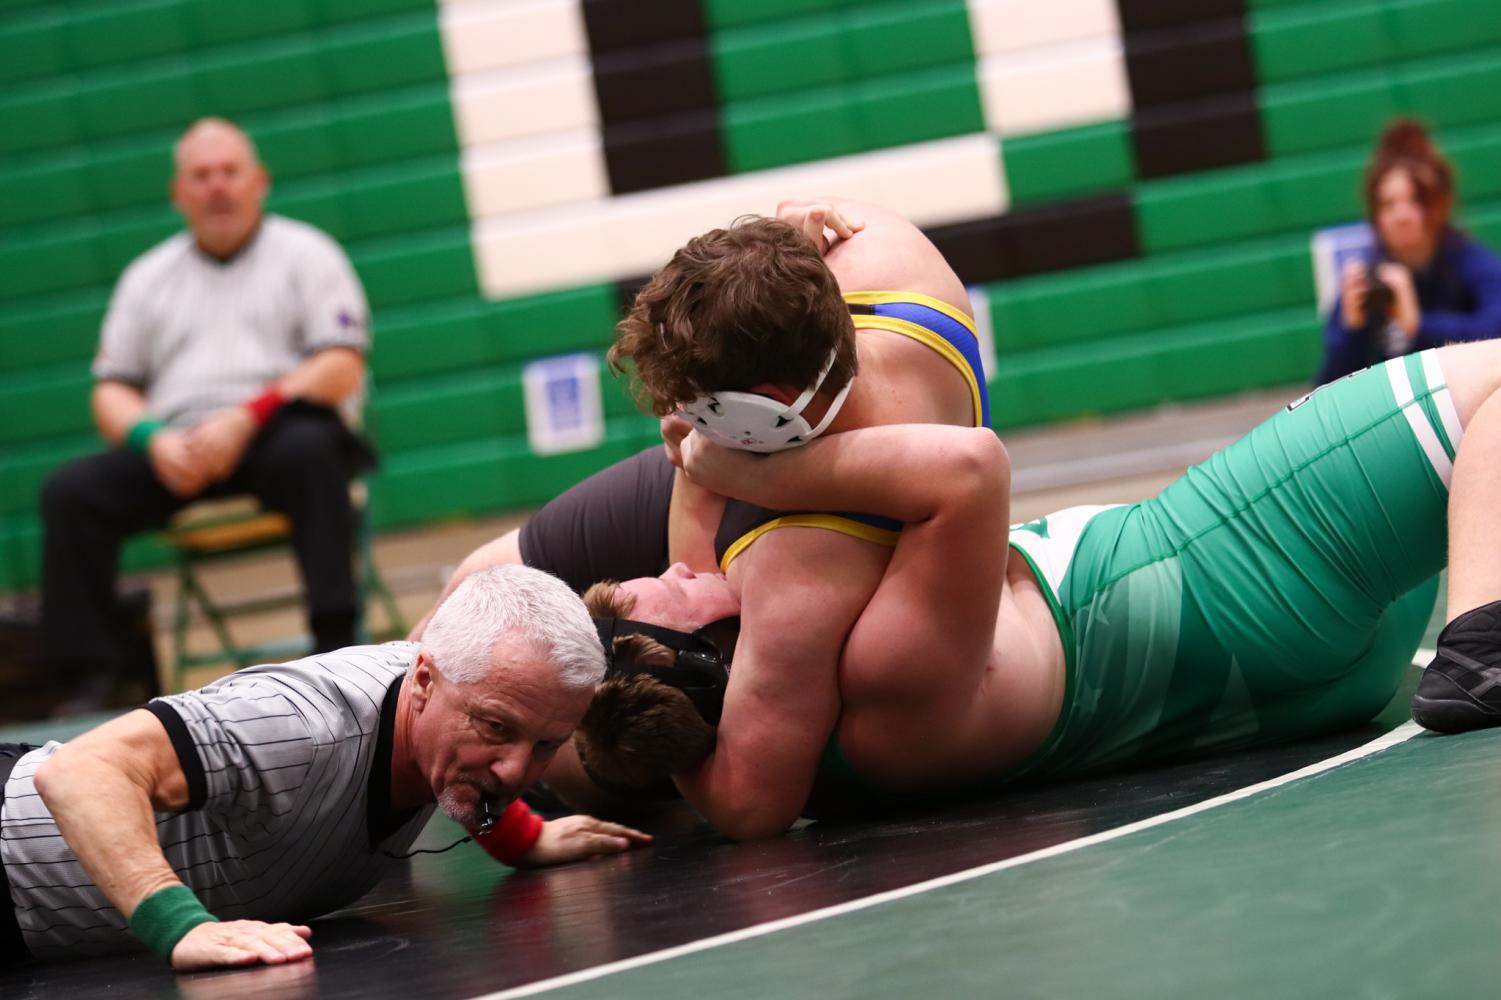 Varsity+wrestling+meet+at+home+%28Photos+by+Reese+Cowden%29